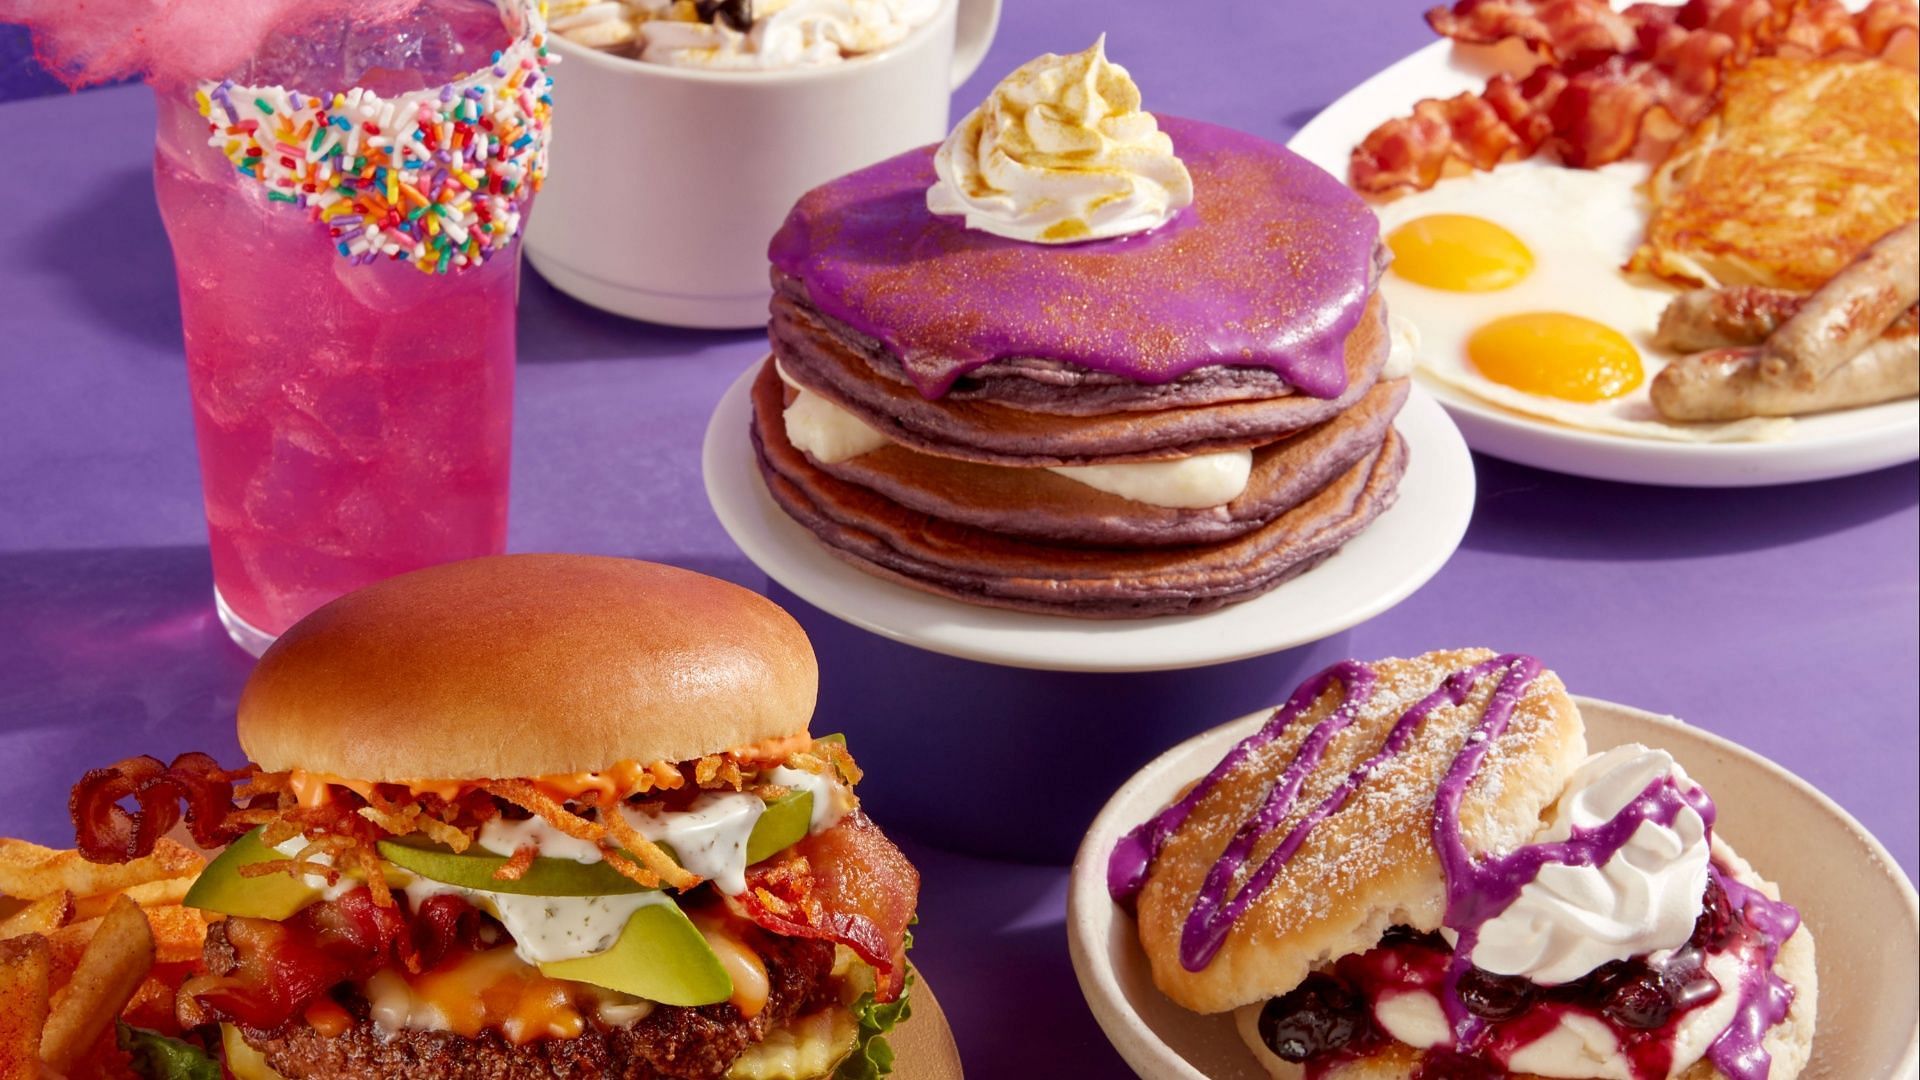 The limited-time Wonka-inspired menu will be available nationwide till January 7 (Image via IHOP)